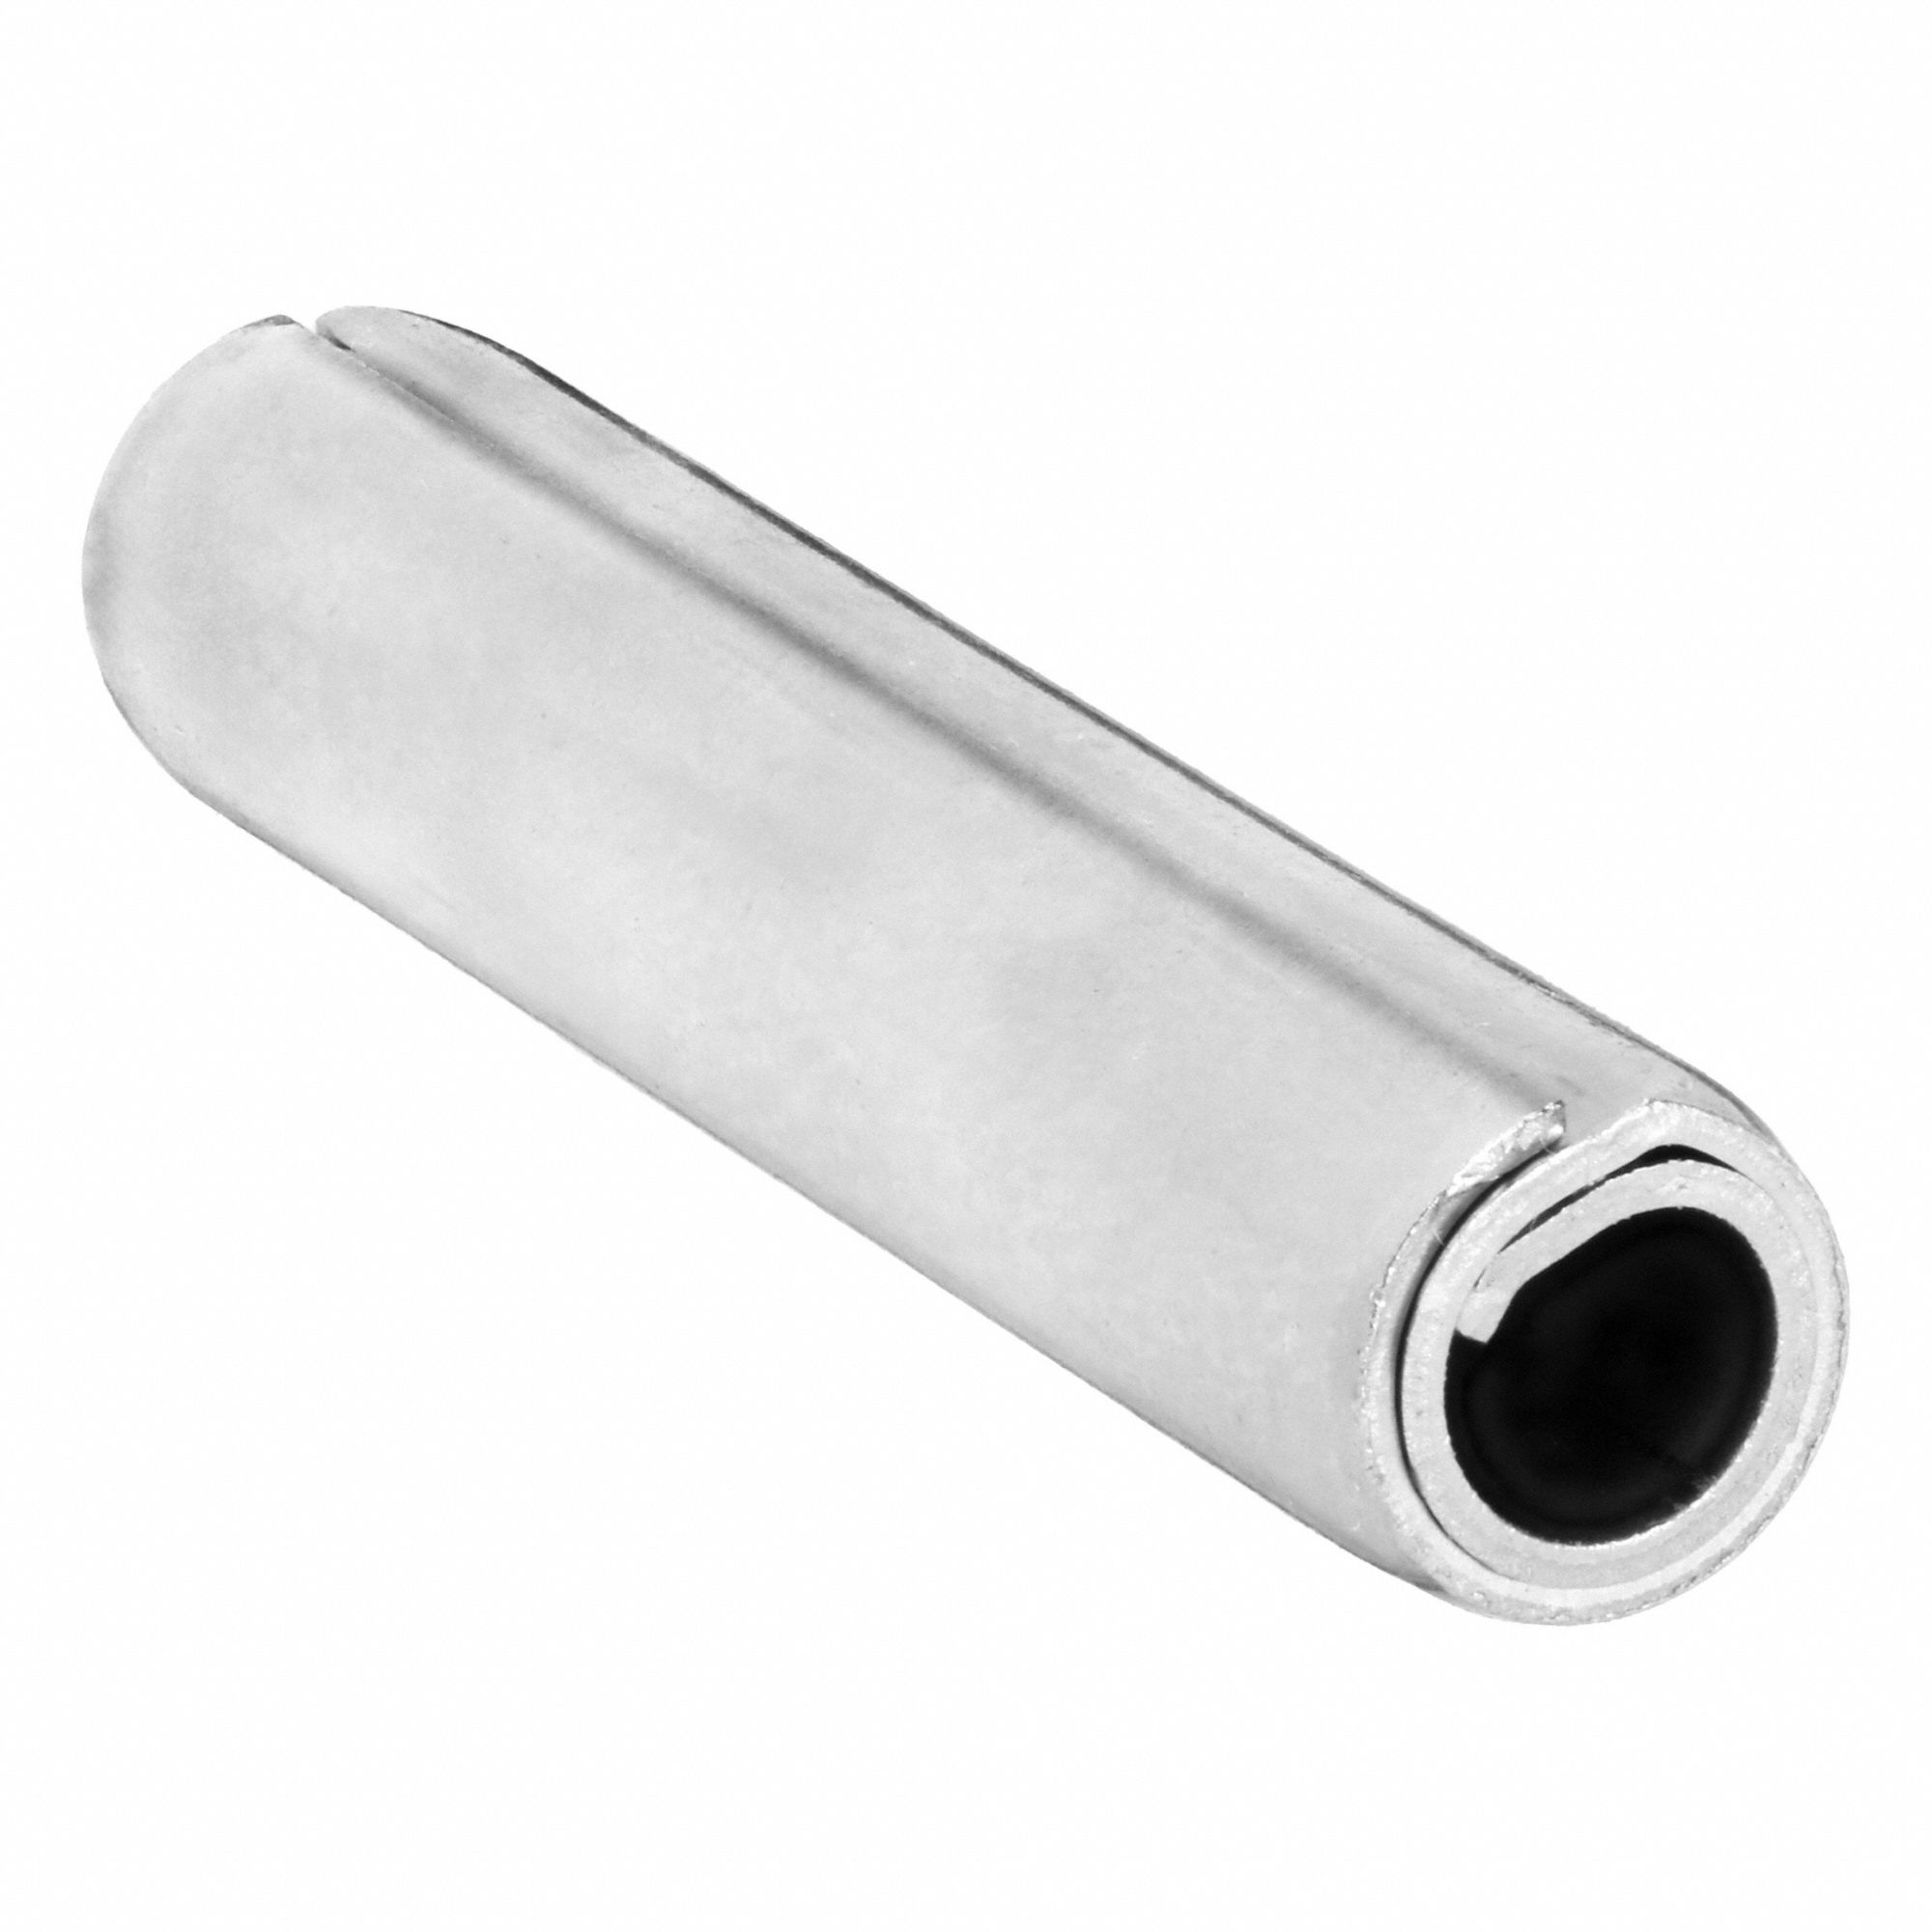 Slotted Spring Pin 3/16 x 3 Carbon Steel Zinc Clear